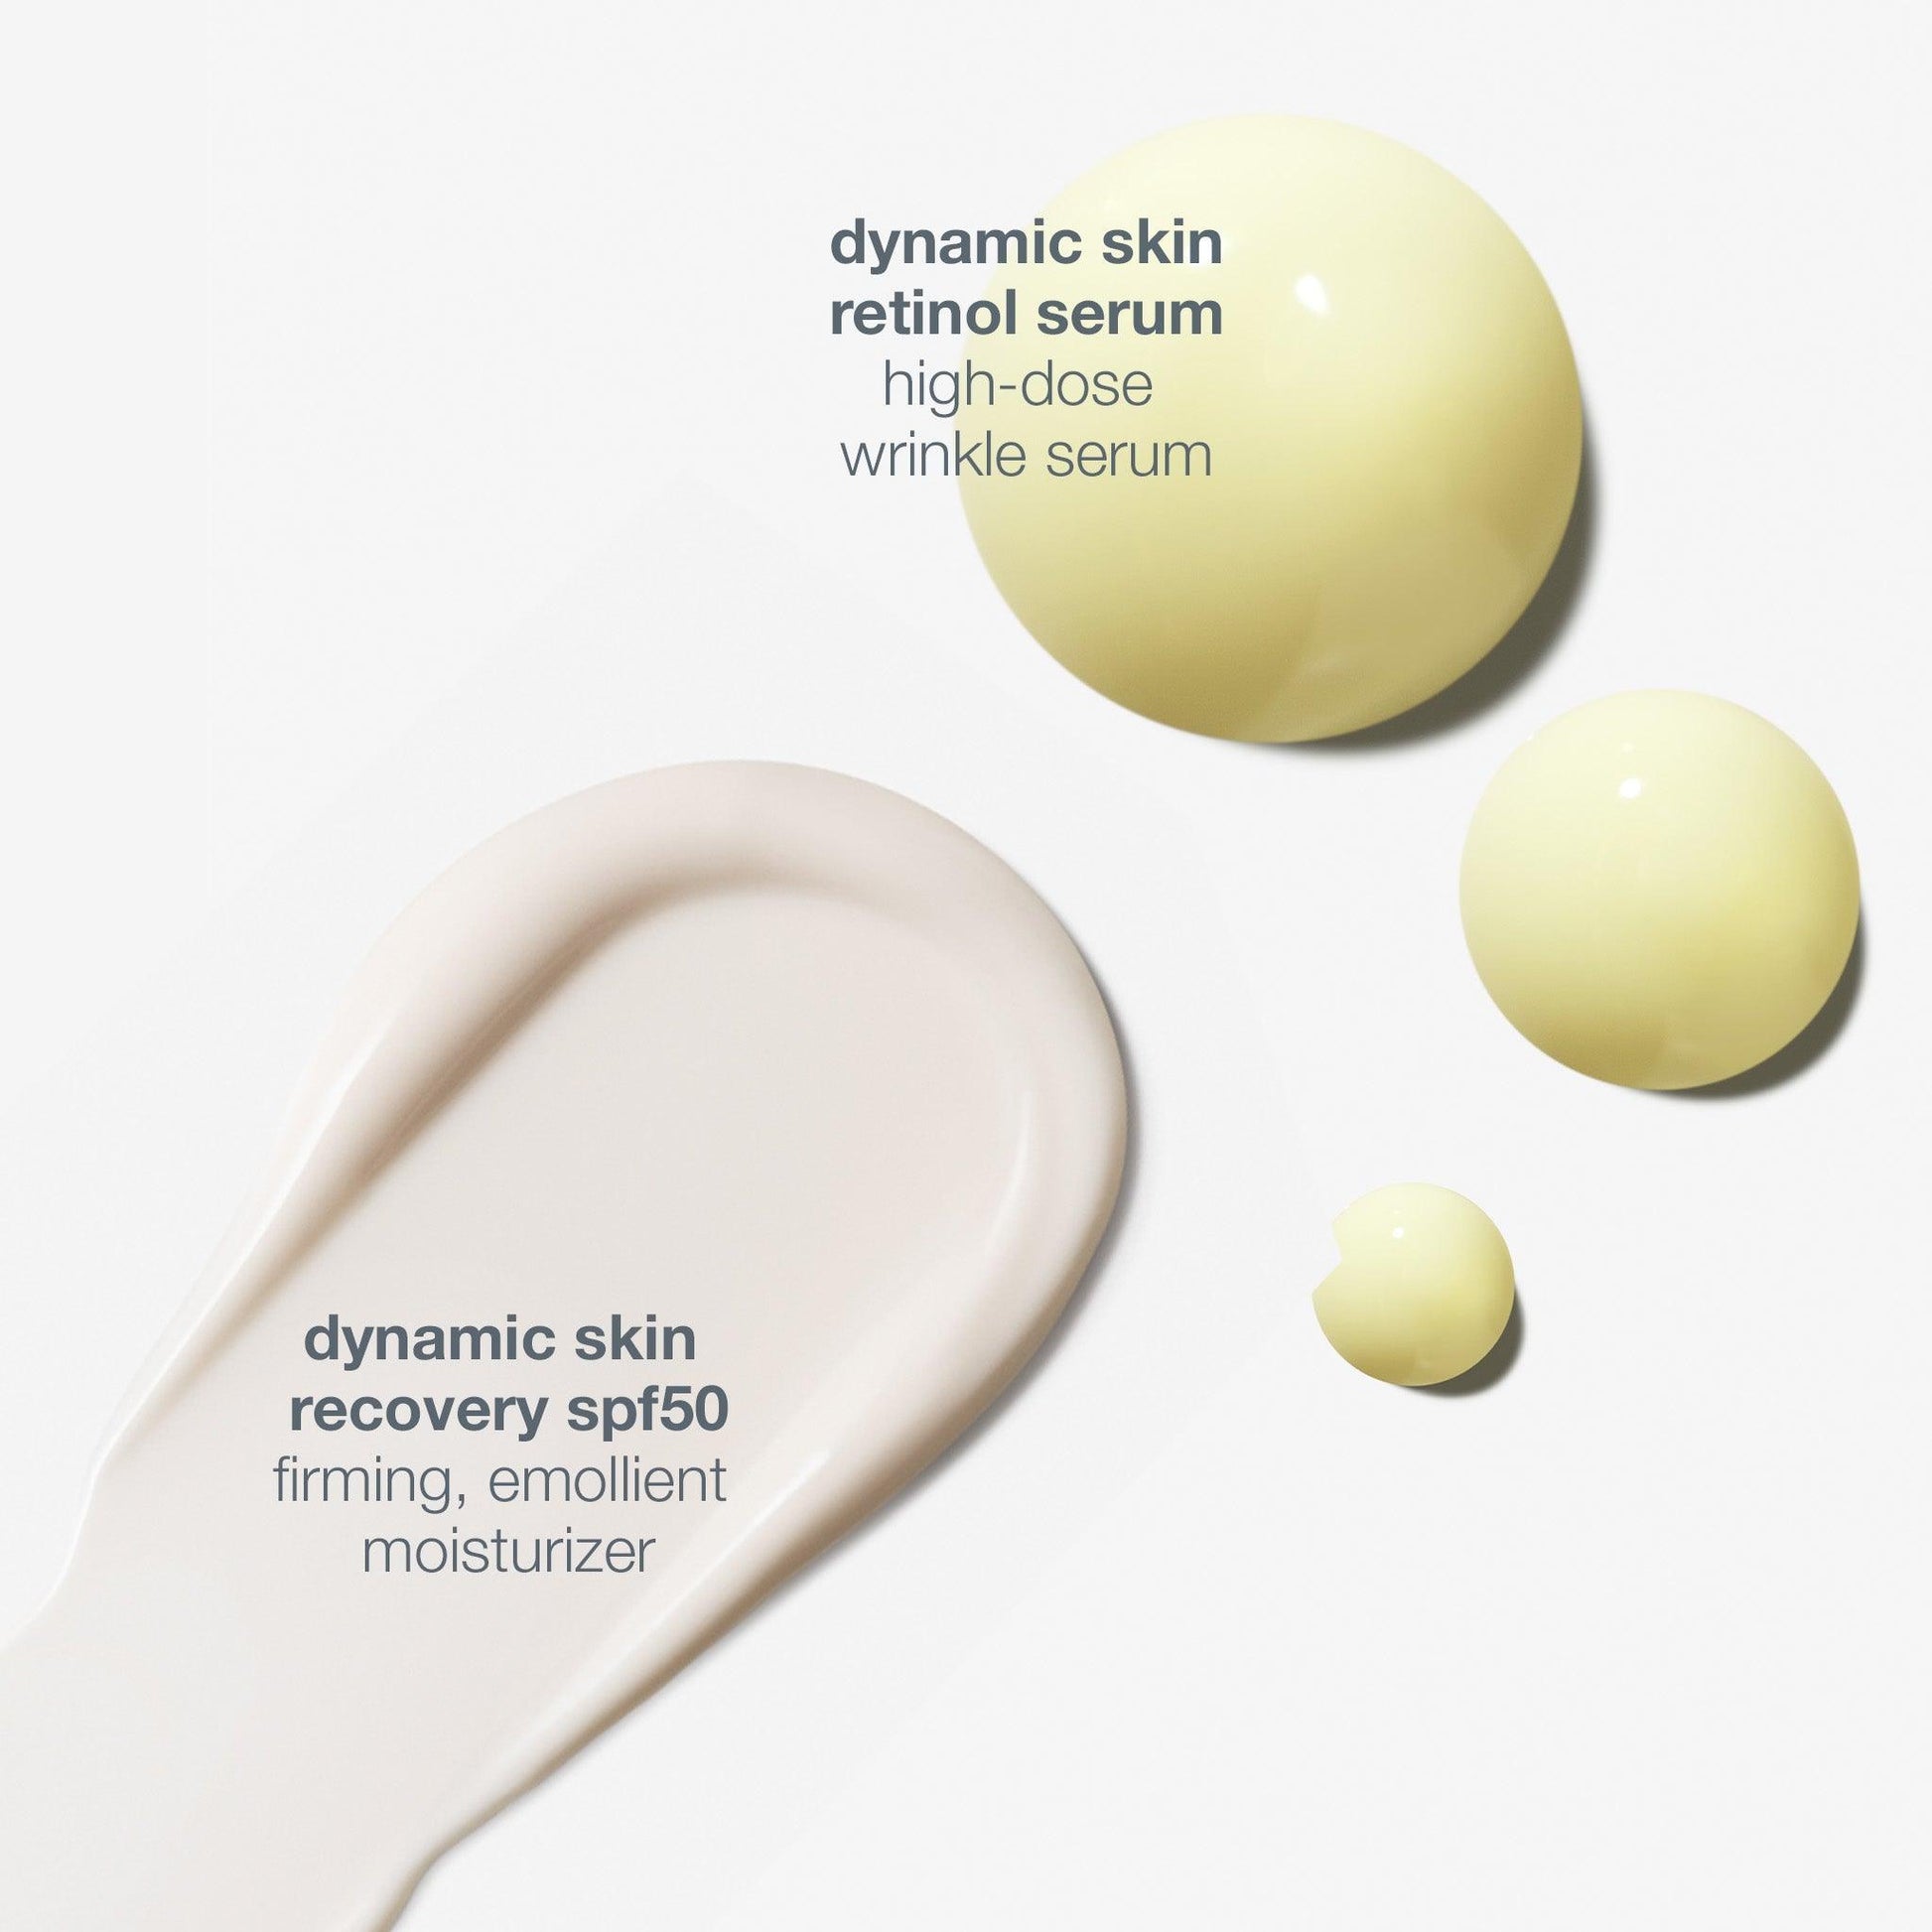 dynamic skin recovery spf50 duo (1 full-size + 1 free travel-size) - Dermalogica Malaysia